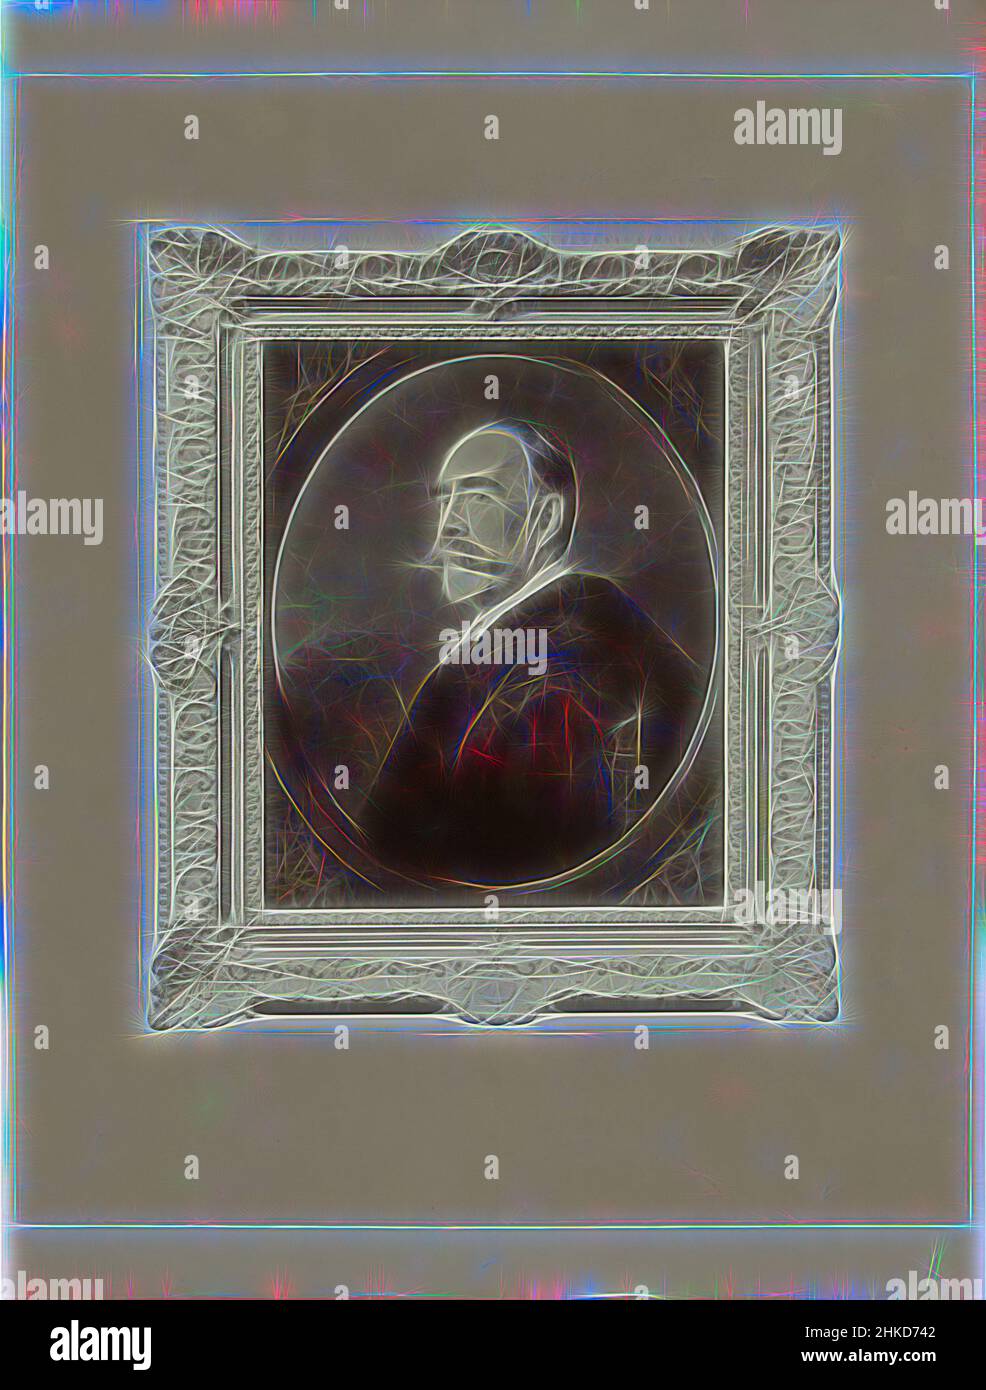 Inspired by Photoreproduction of a painted portrait of Constantin de Wemer, Mr. Constantin de Wemer, Michel Berthaud, after:, France, 1890 - 1905, paper, albumen print, height 248 mm × width 214 mmheight 396 mm × width 298 mm, Reimagined by Artotop. Classic art reinvented with a modern twist. Design of warm cheerful glowing of brightness and light ray radiance. Photography inspired by surrealism and futurism, embracing dynamic energy of modern technology, movement, speed and revolutionize culture Stock Photo